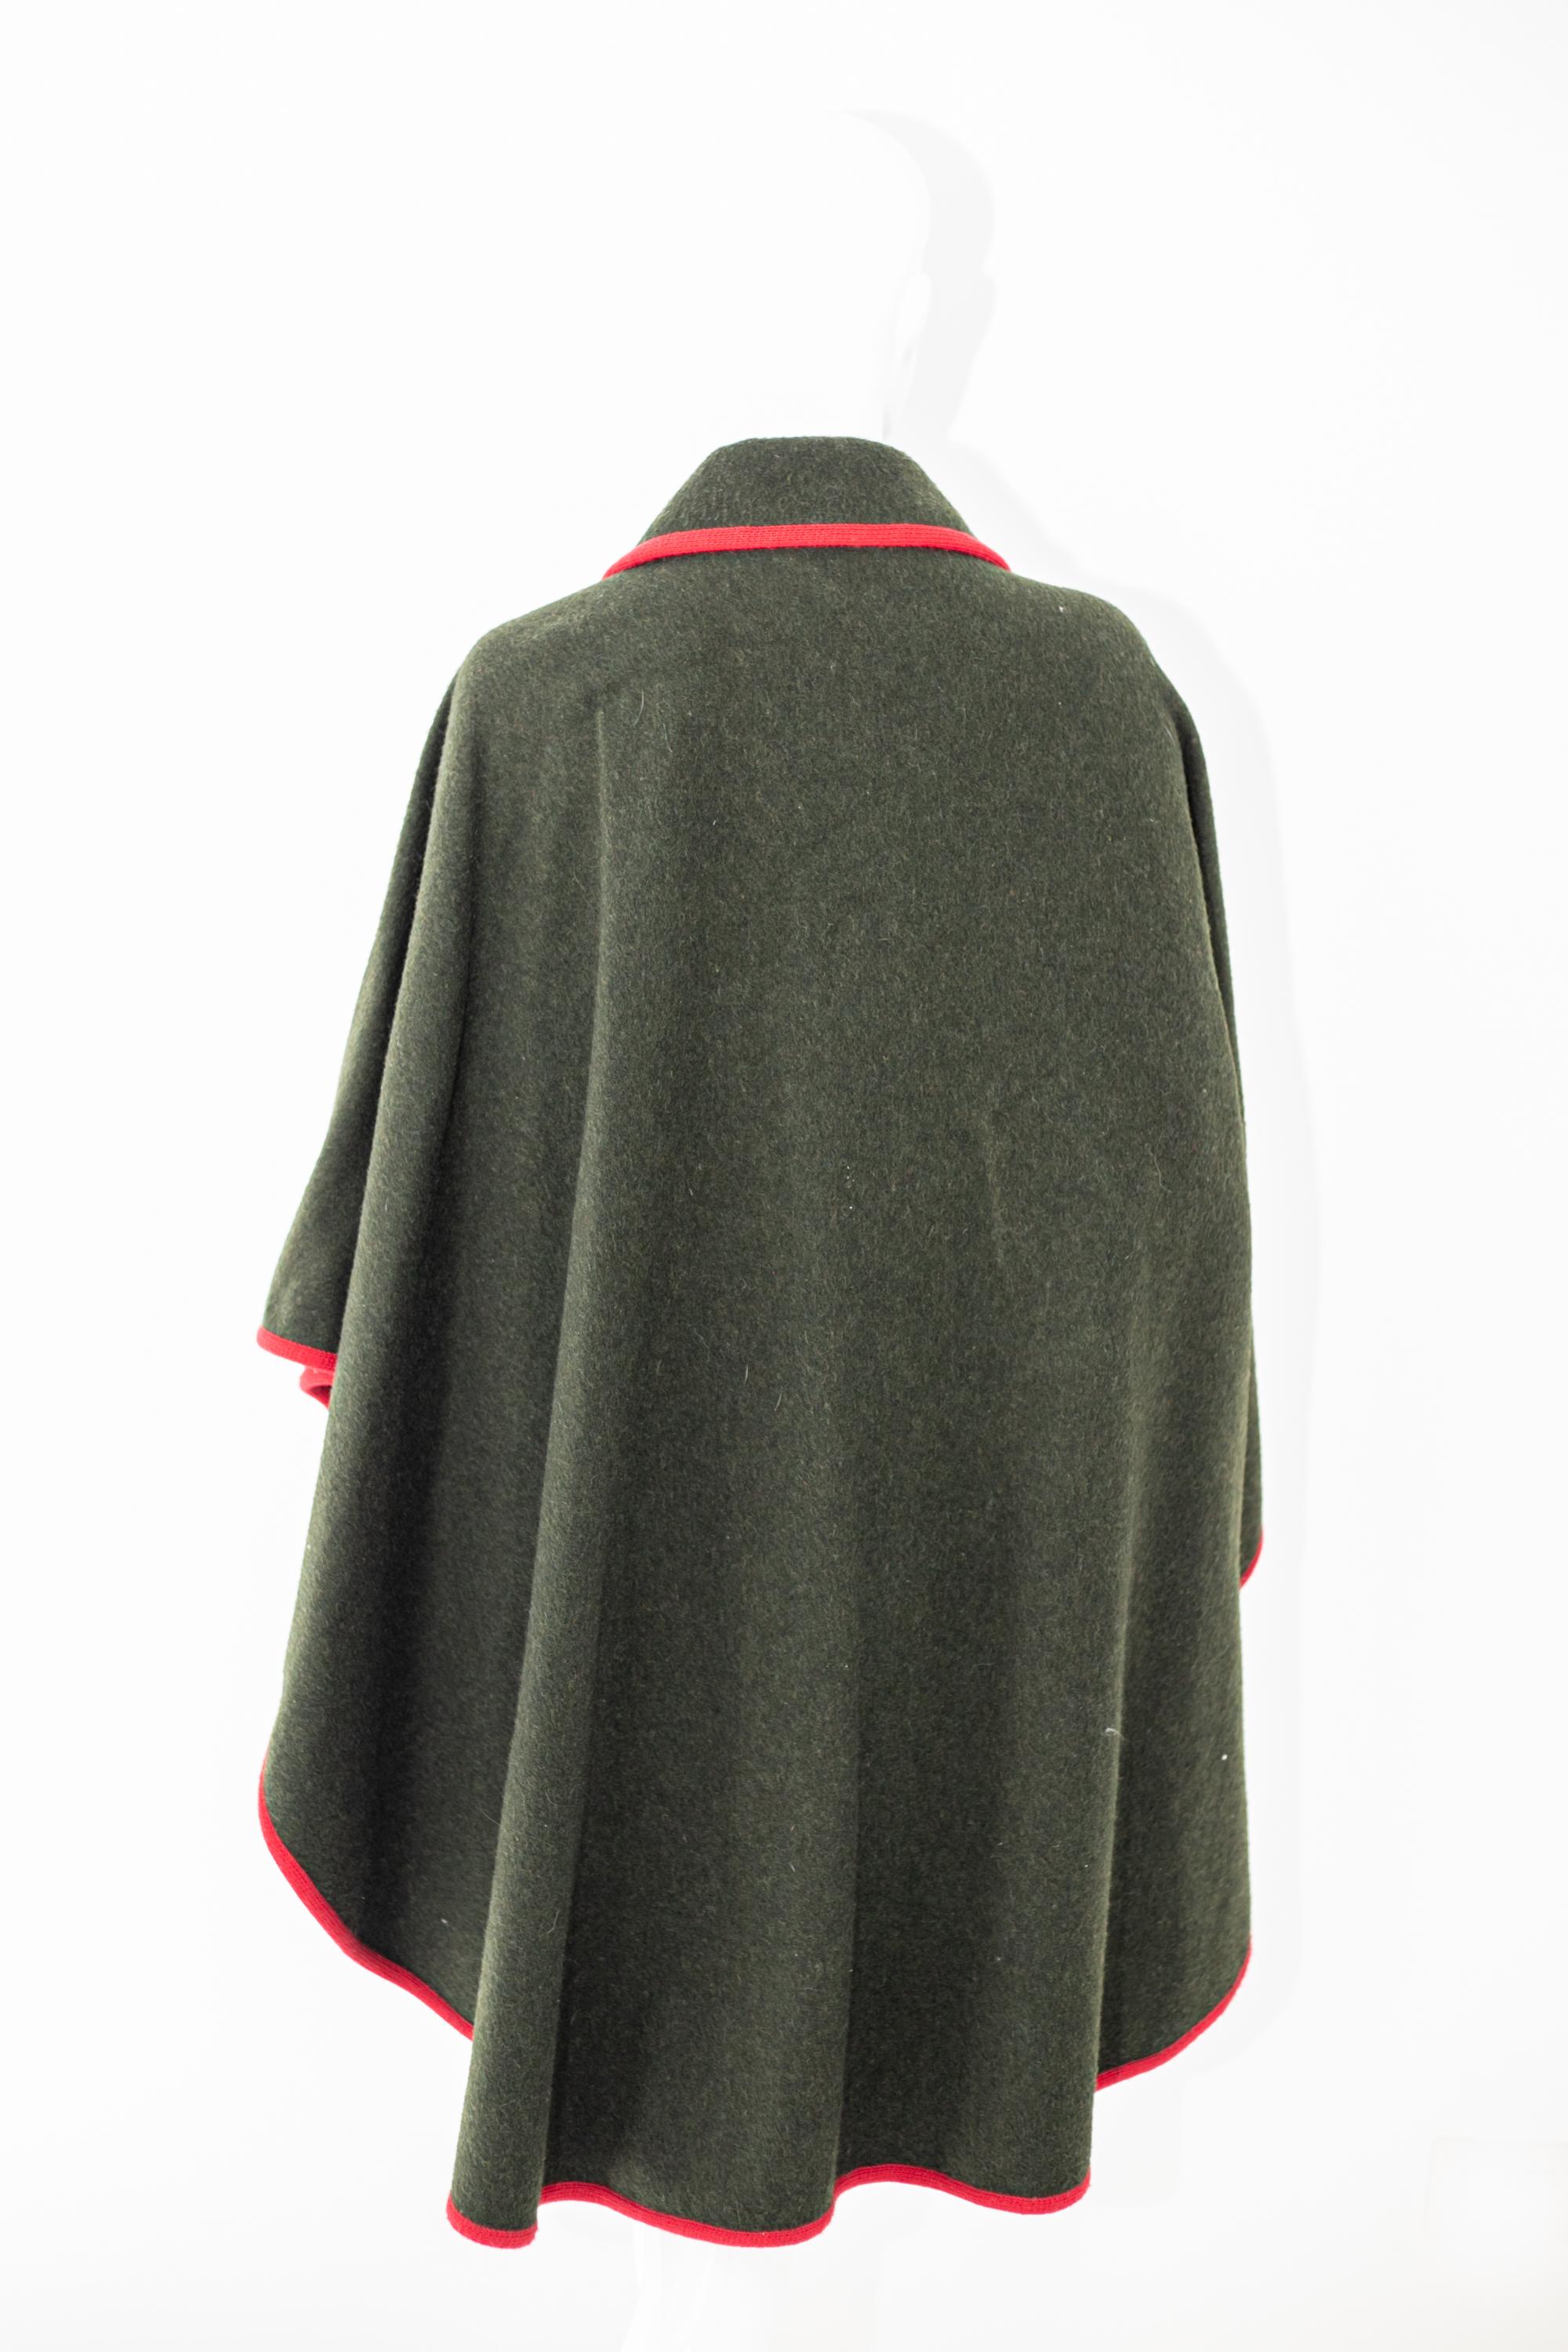 Women's Fiorelle Vintage Capee in Green Wool and Red Profiles For Sale